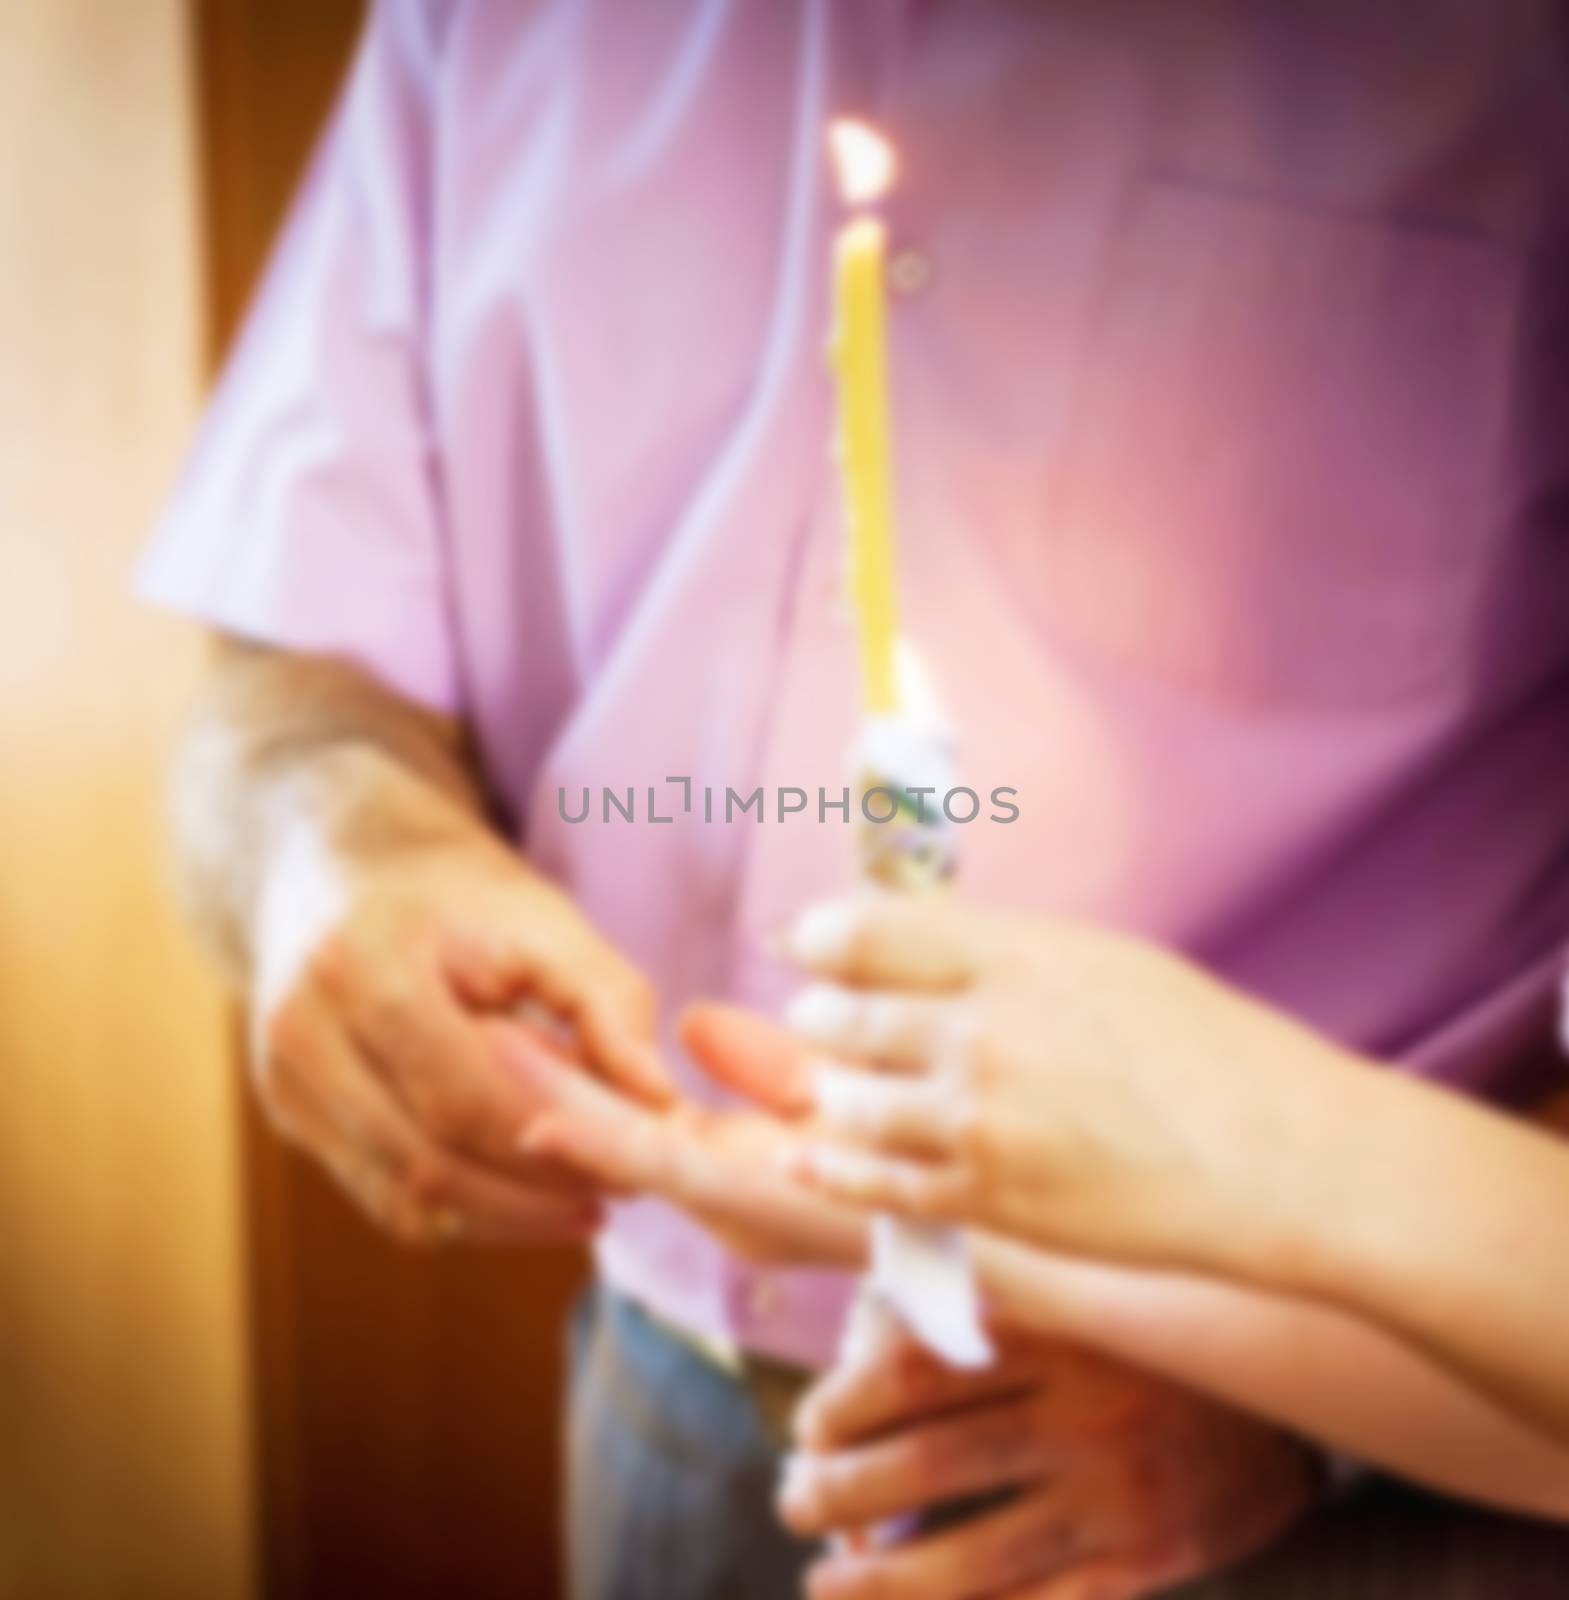 Wedding in the Church of the Christian and Catholic wedding ceremony, the husband puts on a wedding ring to his wife, a religious wedding white church, blurred